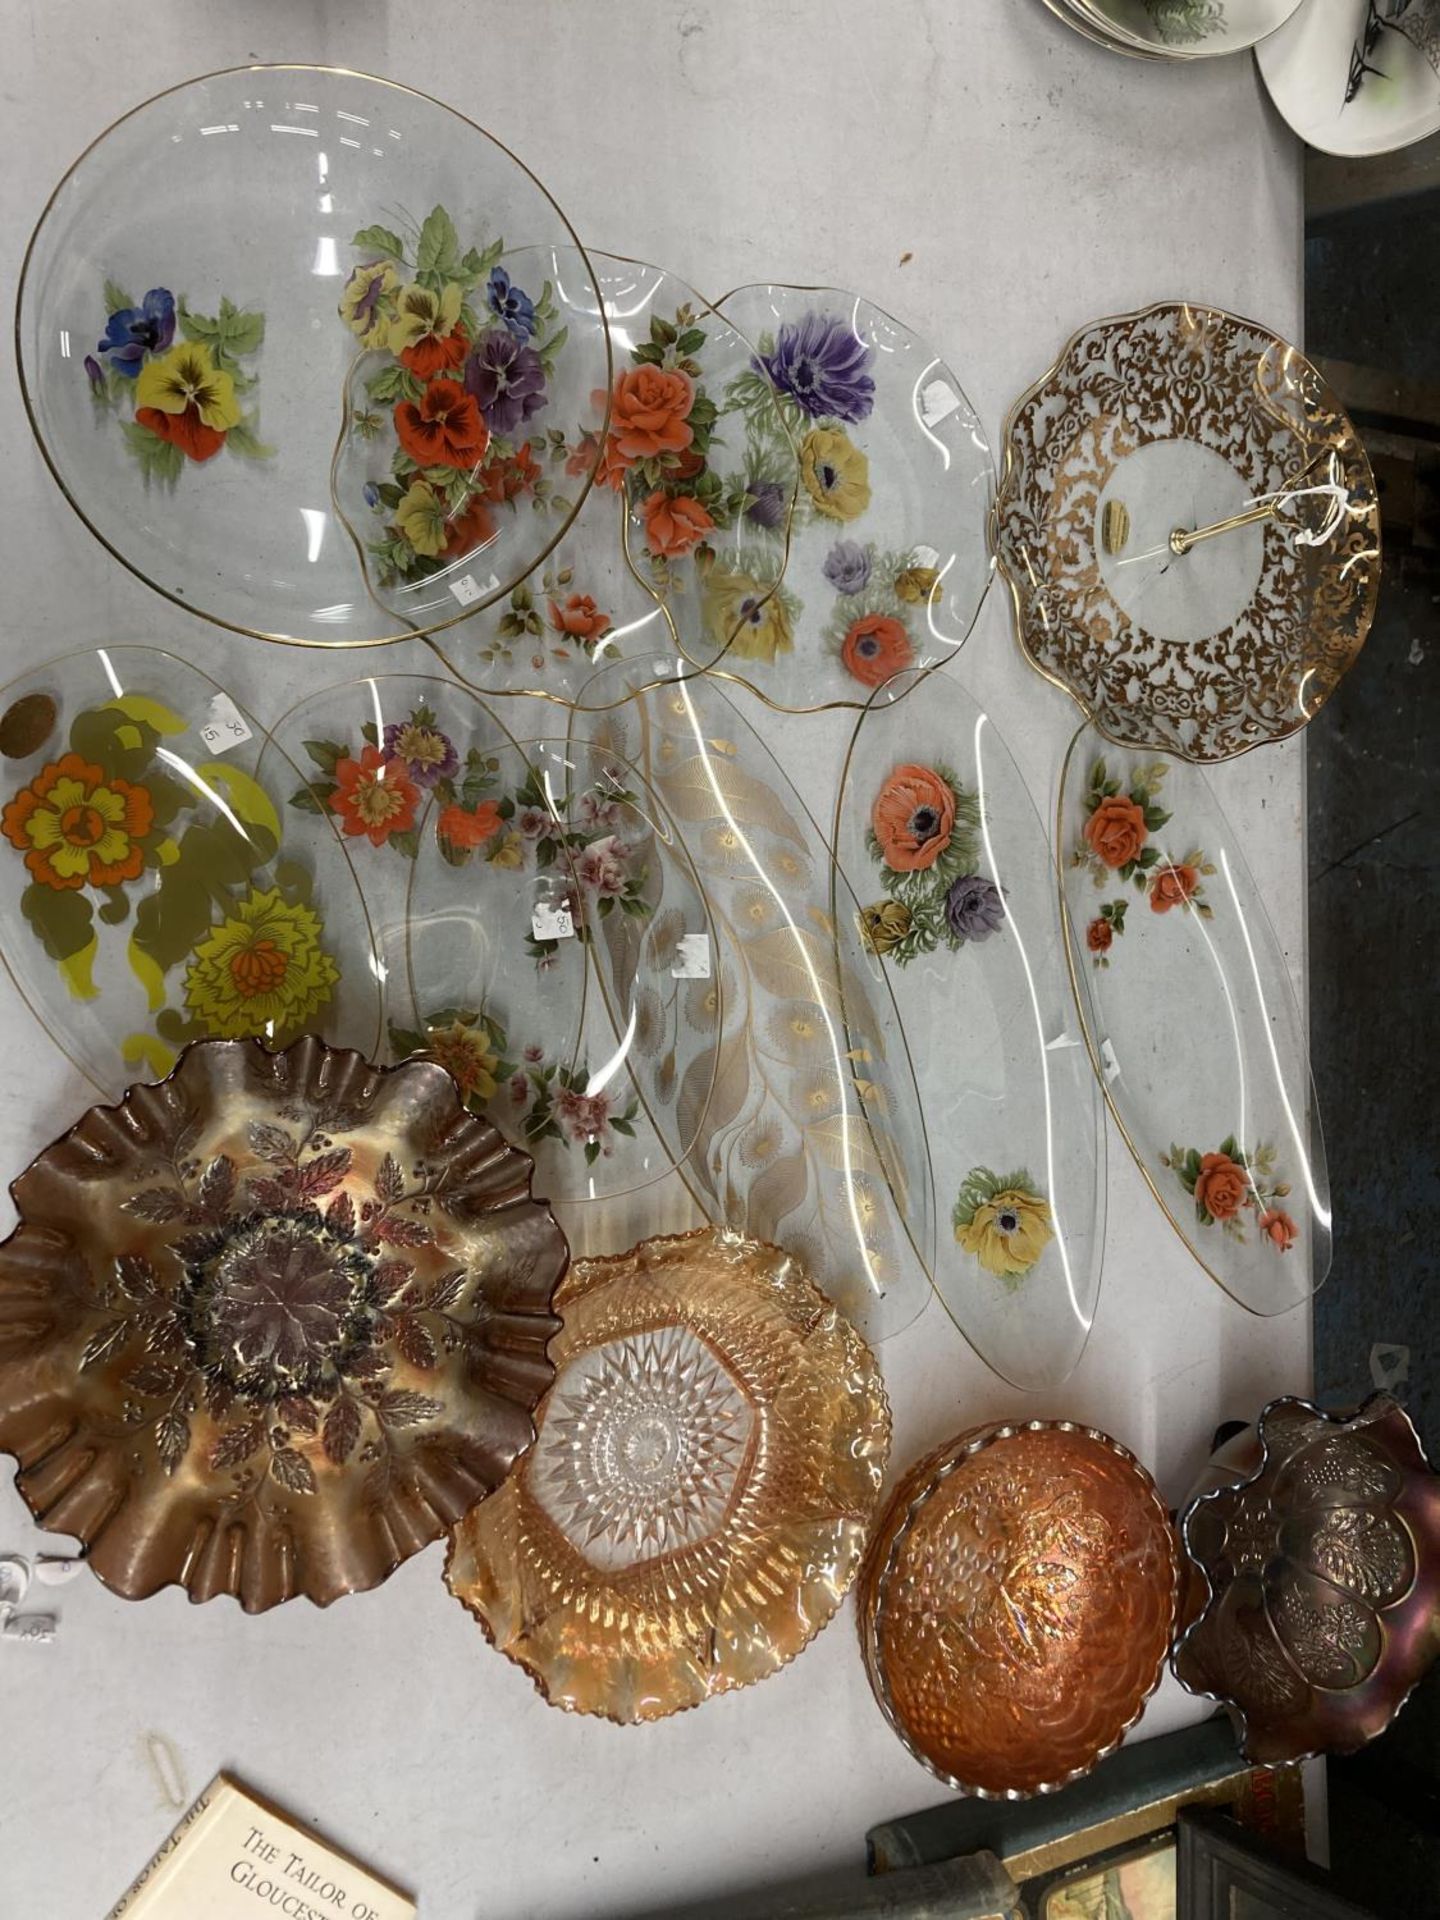 A QUANTITY OF GLASSWARE TO INCLUDE FLORAL PRINTED SERVING PLATES AND CARNIVAL GLASS BOWLS